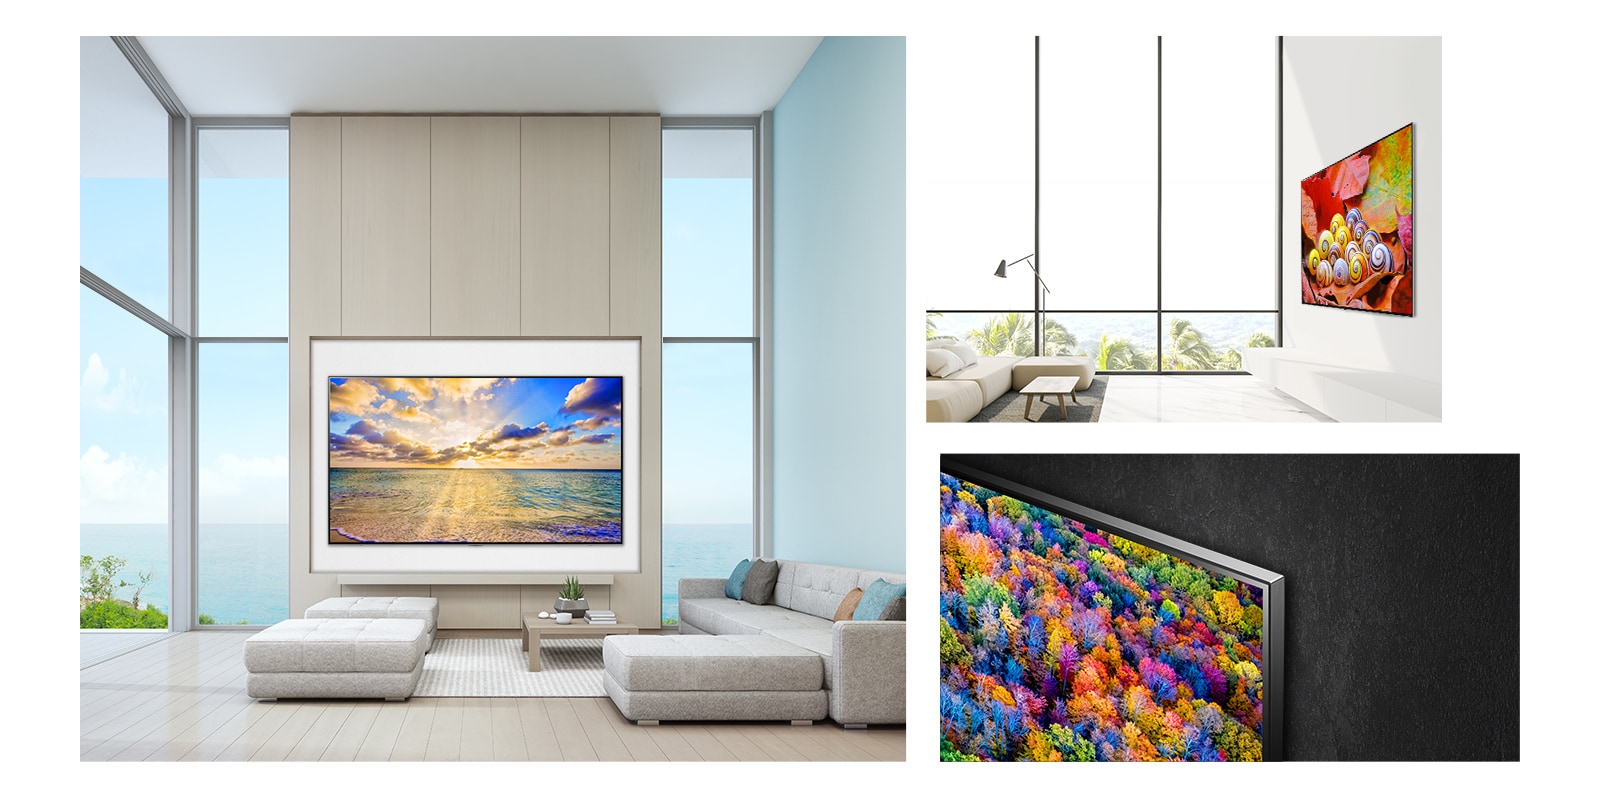 Three scenes of the LG NanoCell TV hung beautifully in a home showing the slim, wall mounted design.